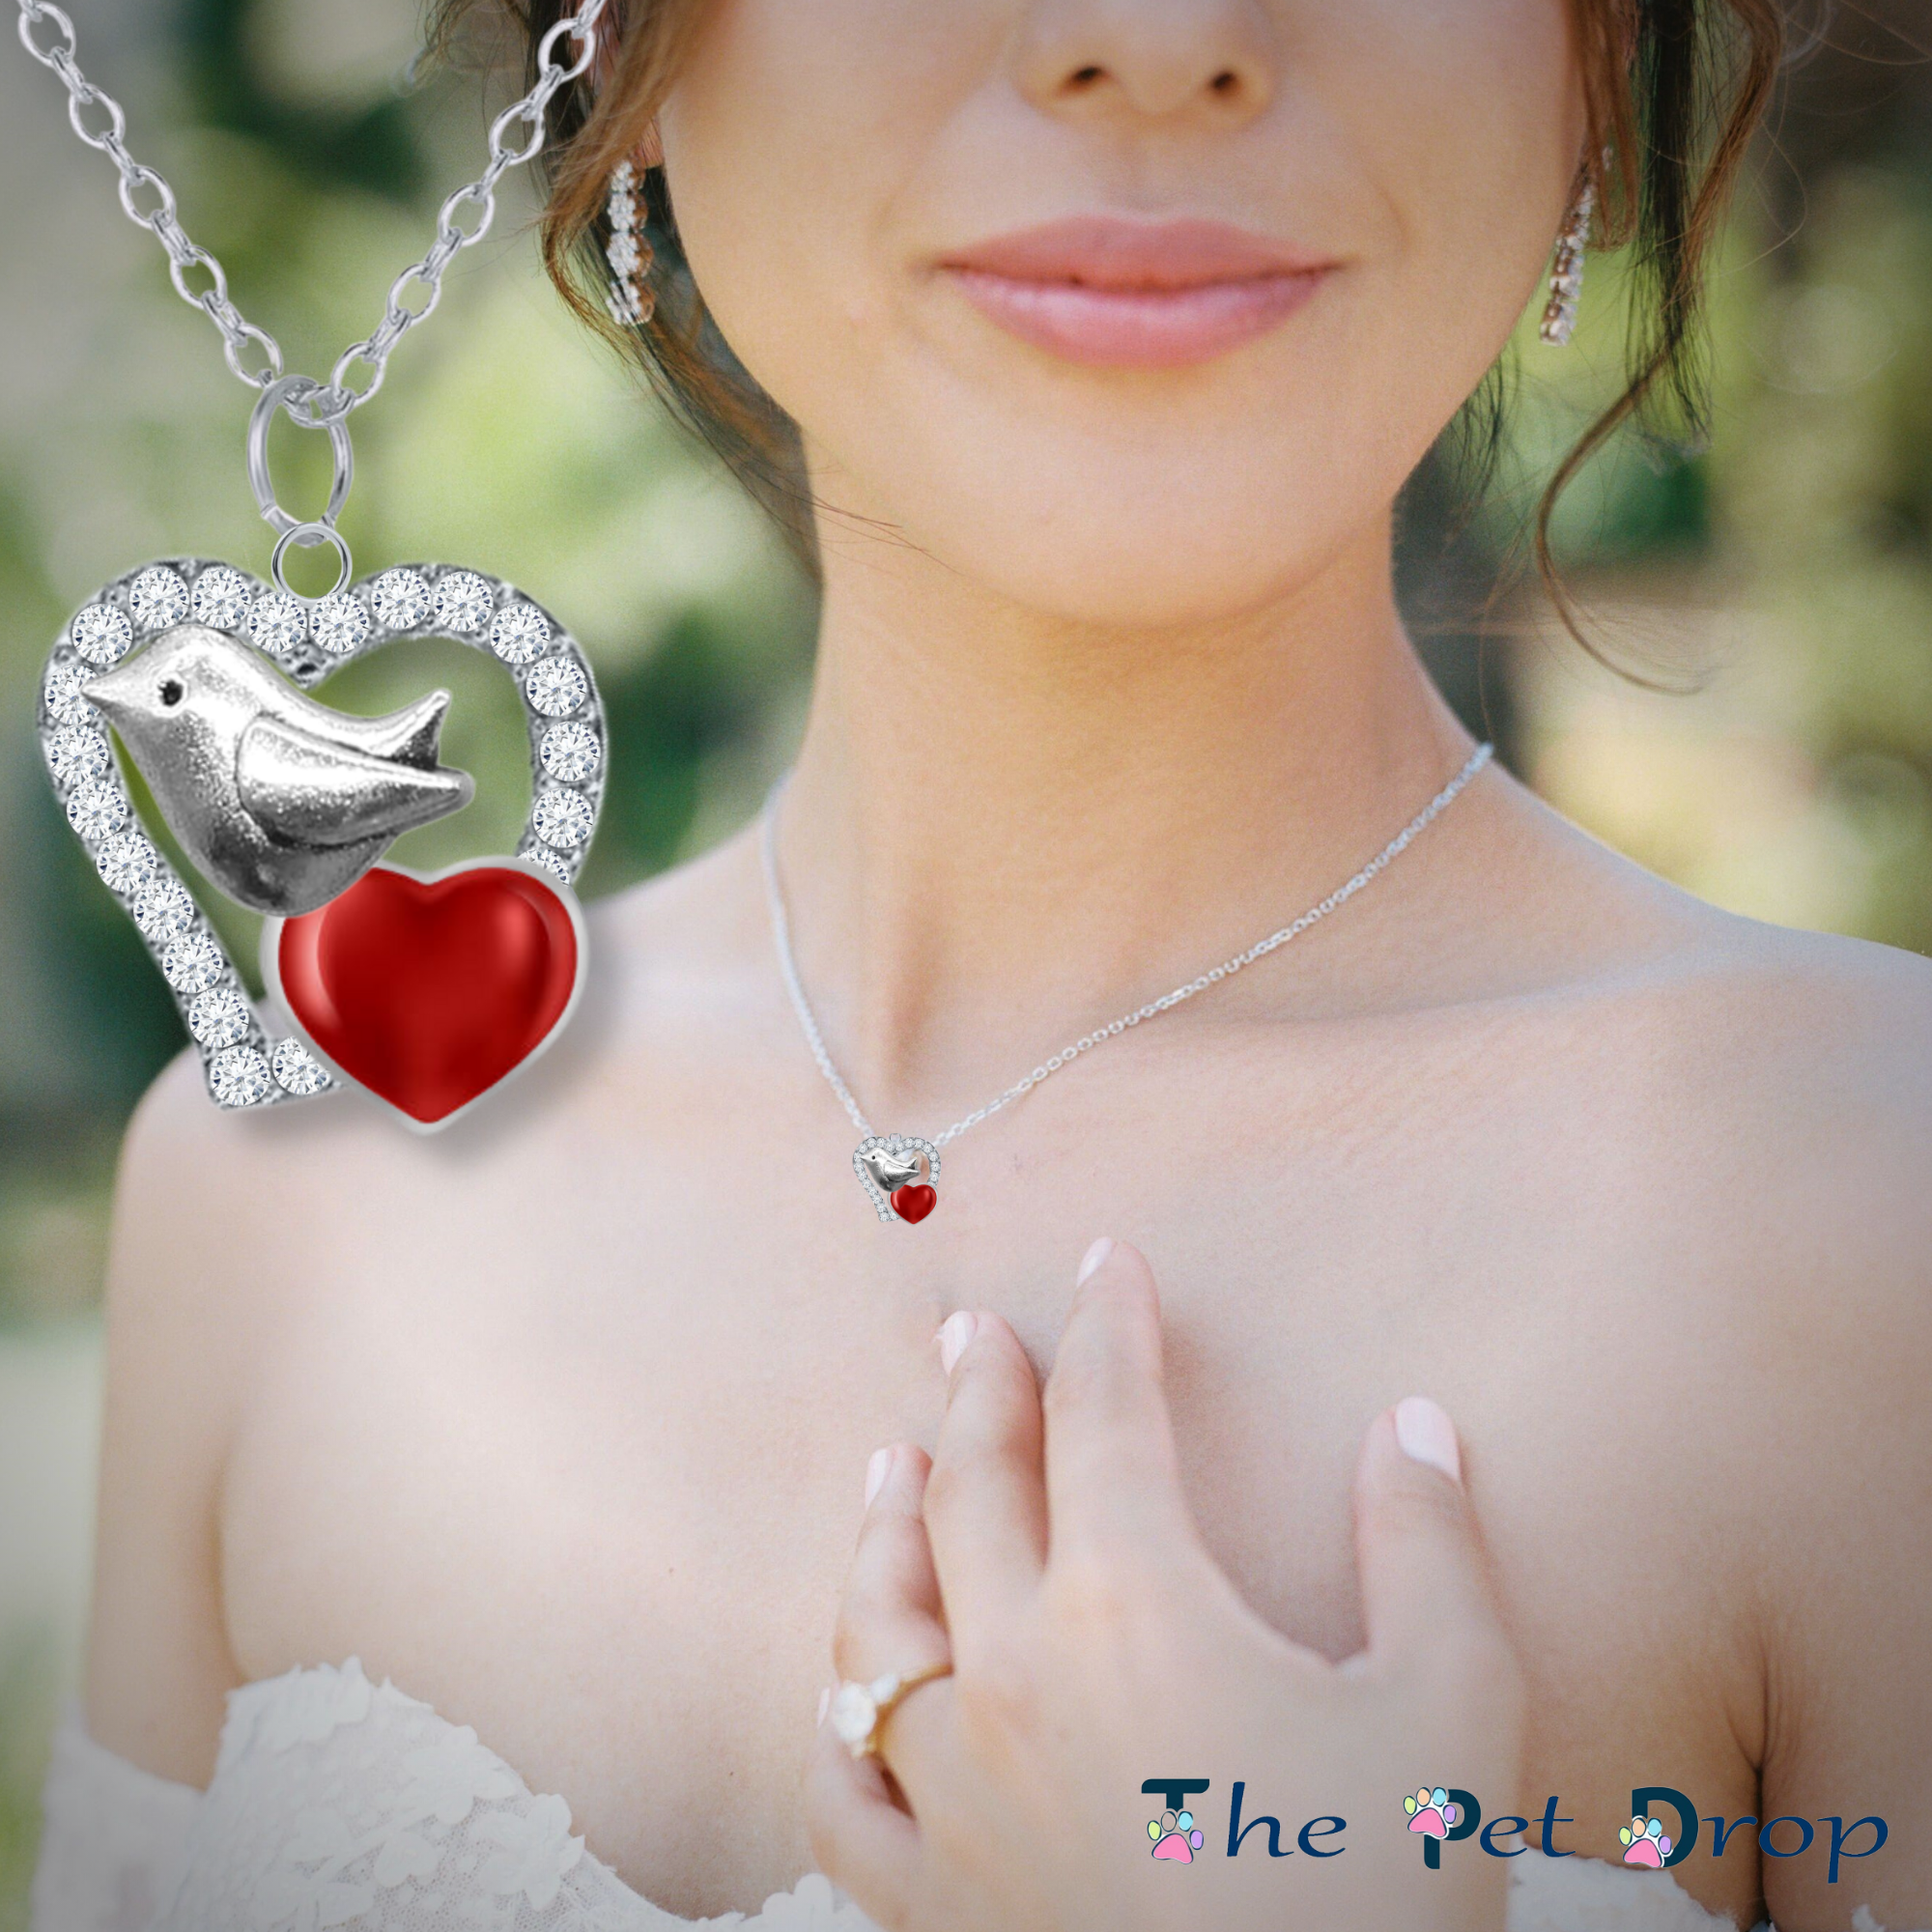 Robin on a crystal heart pendant, with a smaller red heart, hanging from a silver chain on a woman's neck